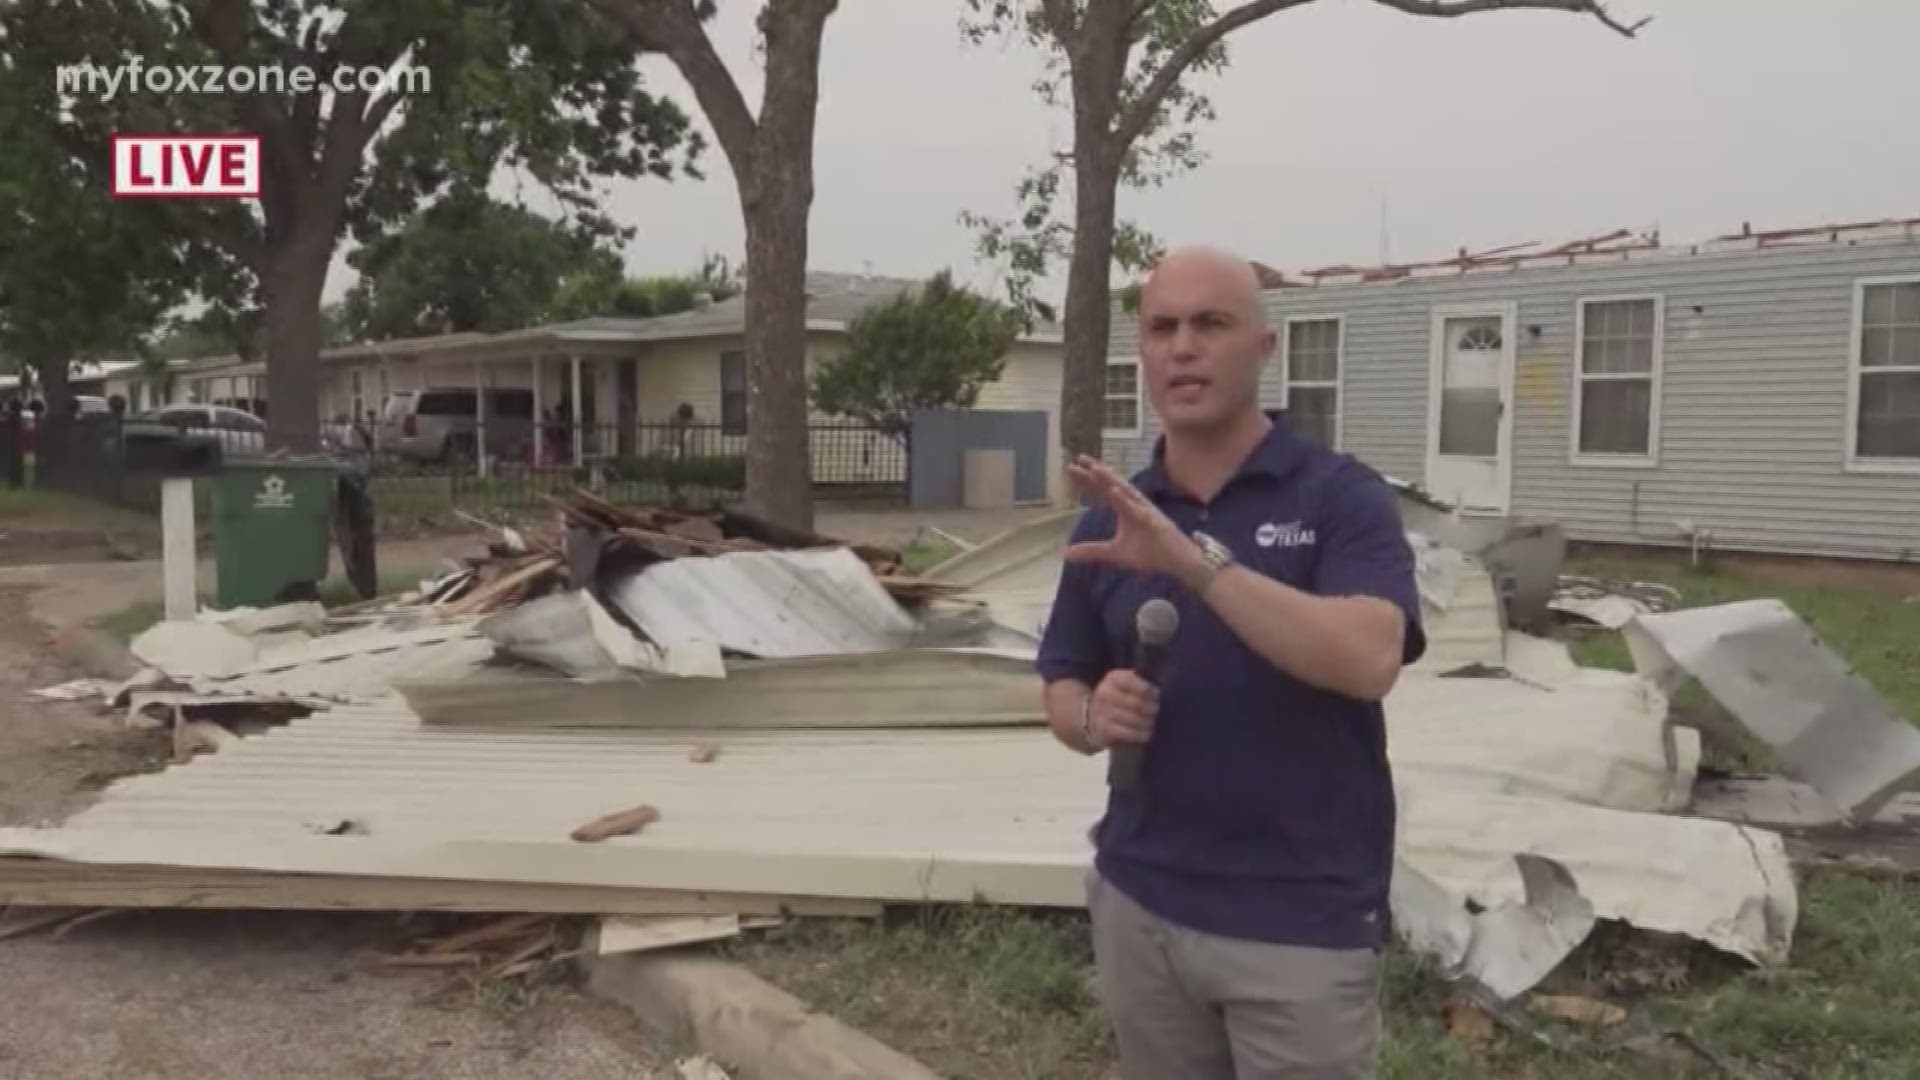 A local resident talks about the moment an EF2 tornado touched down in her neighborhood.